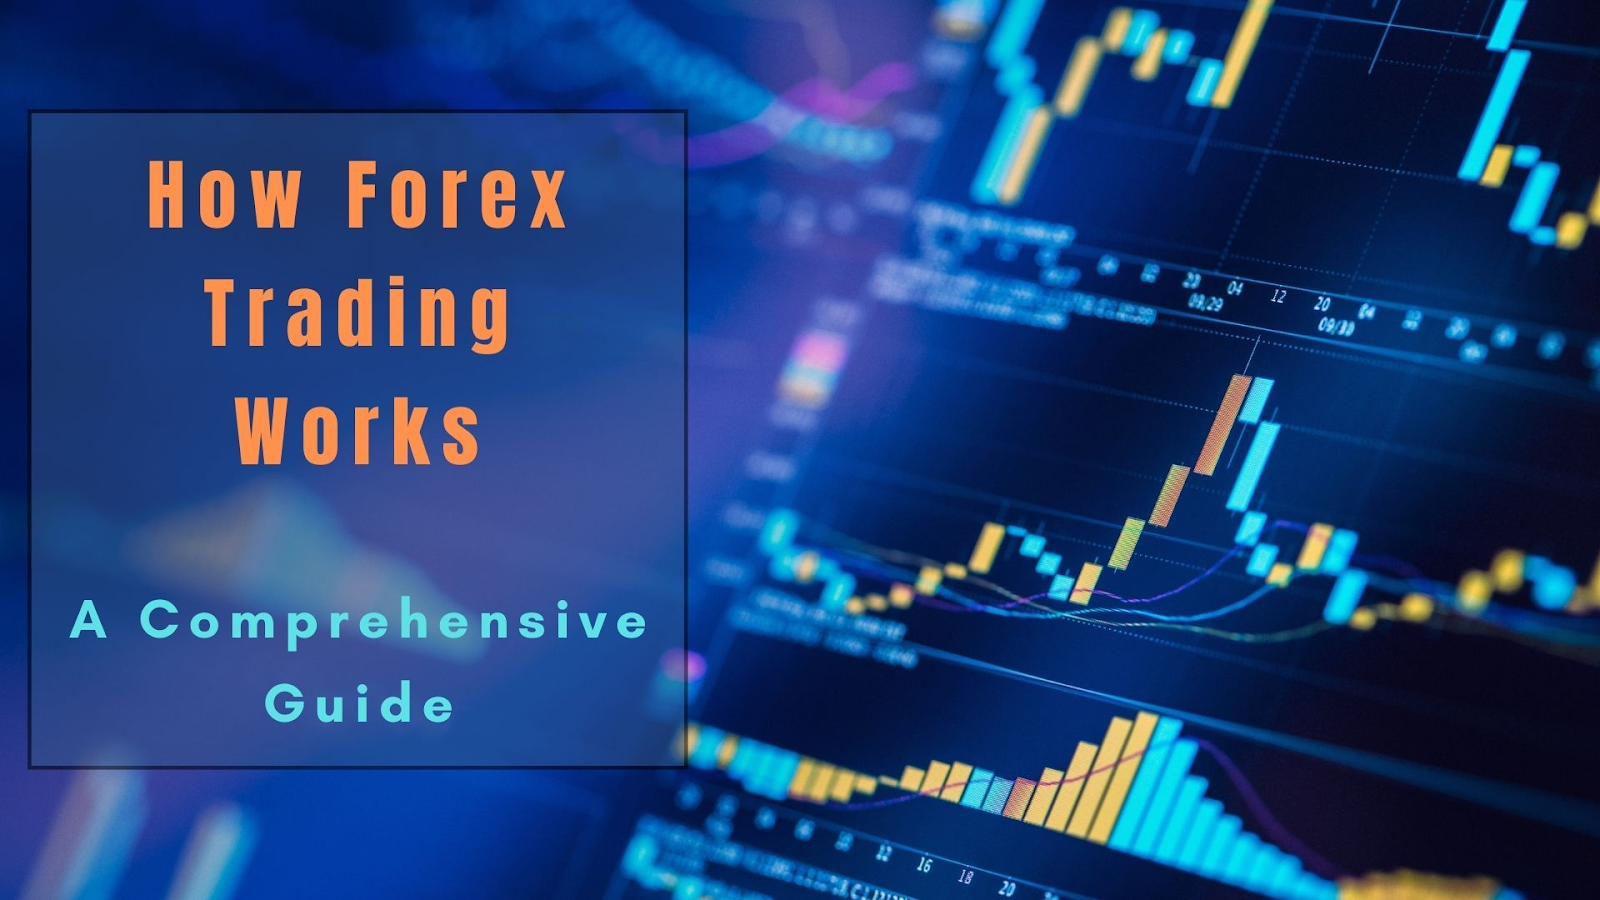 How Forex Trading Works: A Comprehensive Guide For Beginners